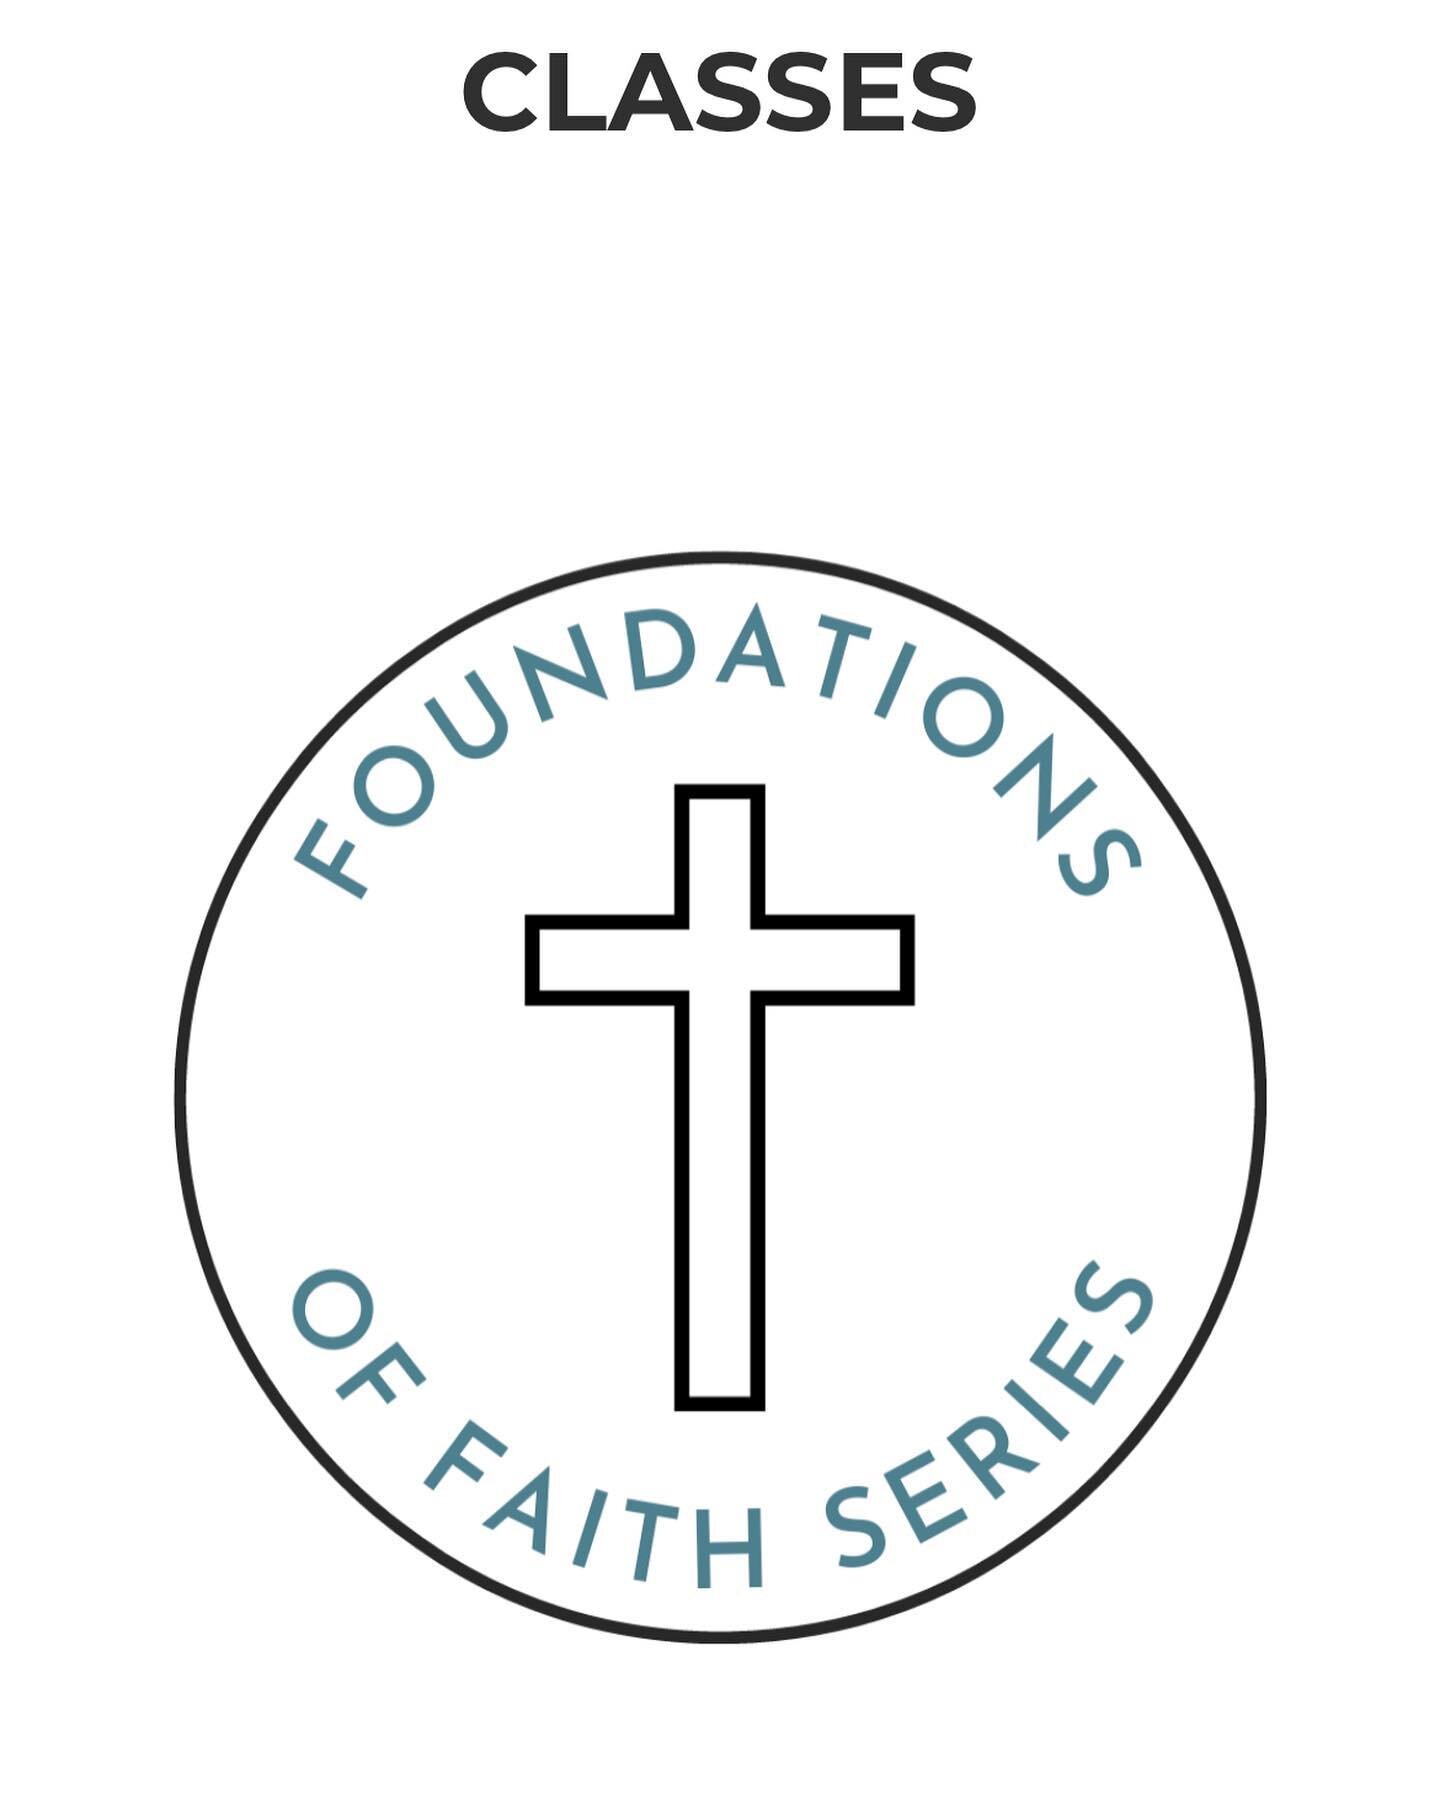 Hey Barn Family!

A quick reminder about the Foundations of Faith series offered through the Training Center. 

Our second class is tonight! Join us as we dive deeper in what it means to have Faith- and fellowship with us as he have dinner together! 